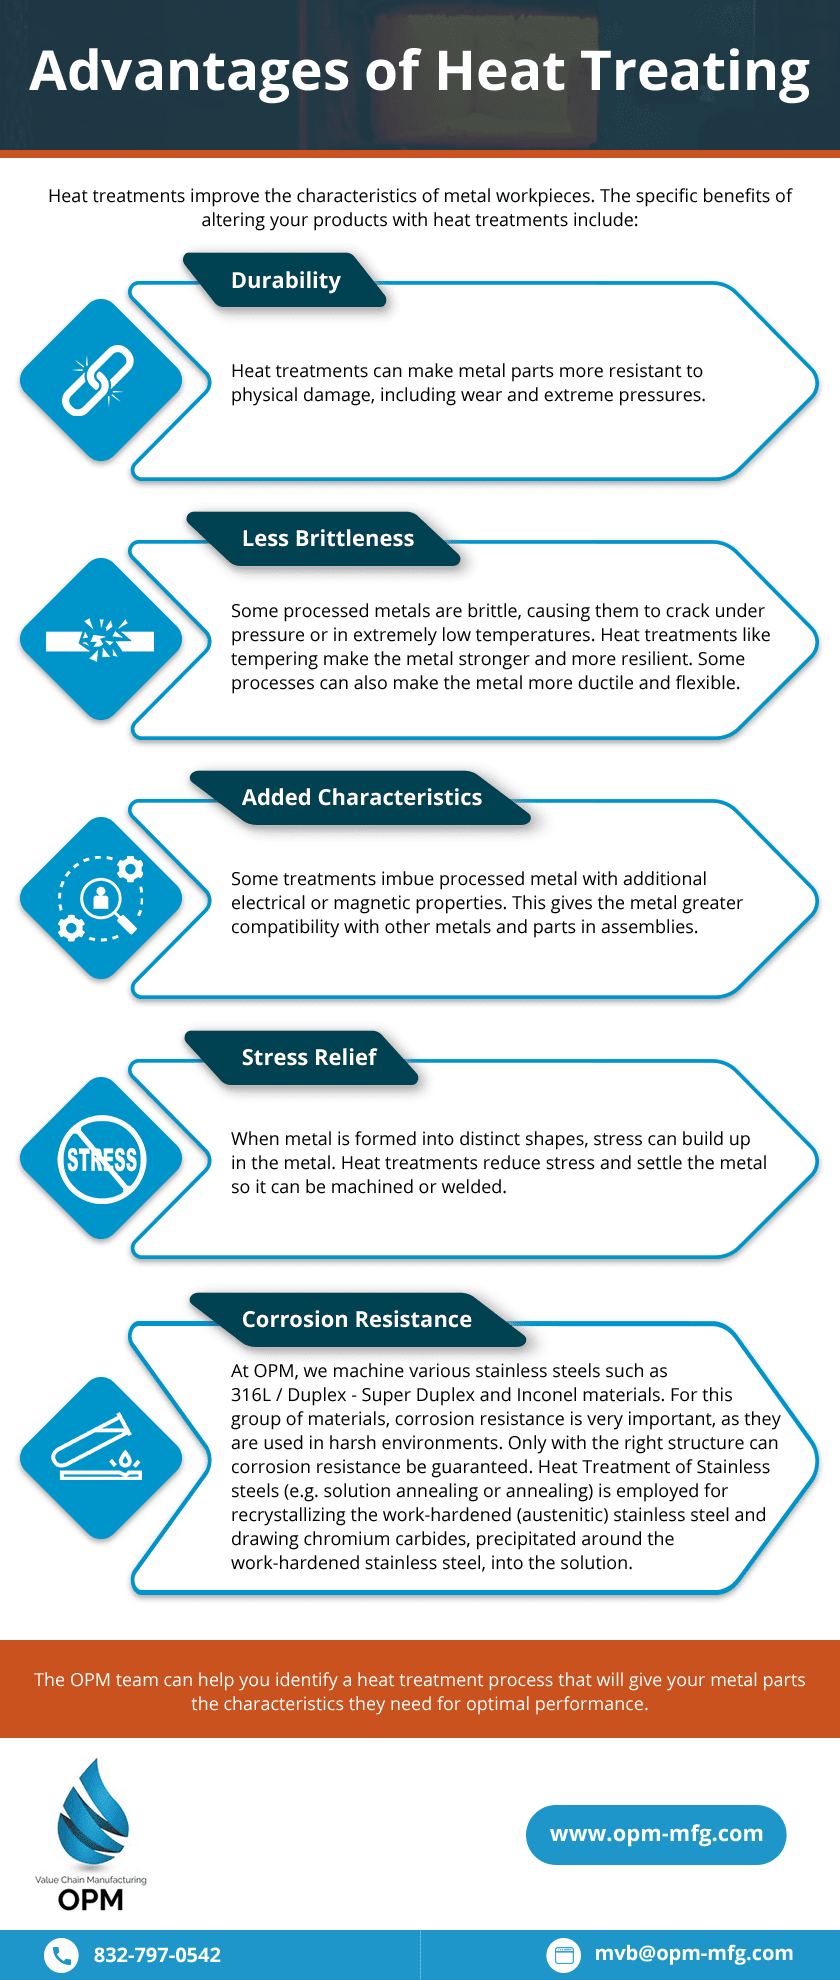 An infographic explaining the advantages of heat treating